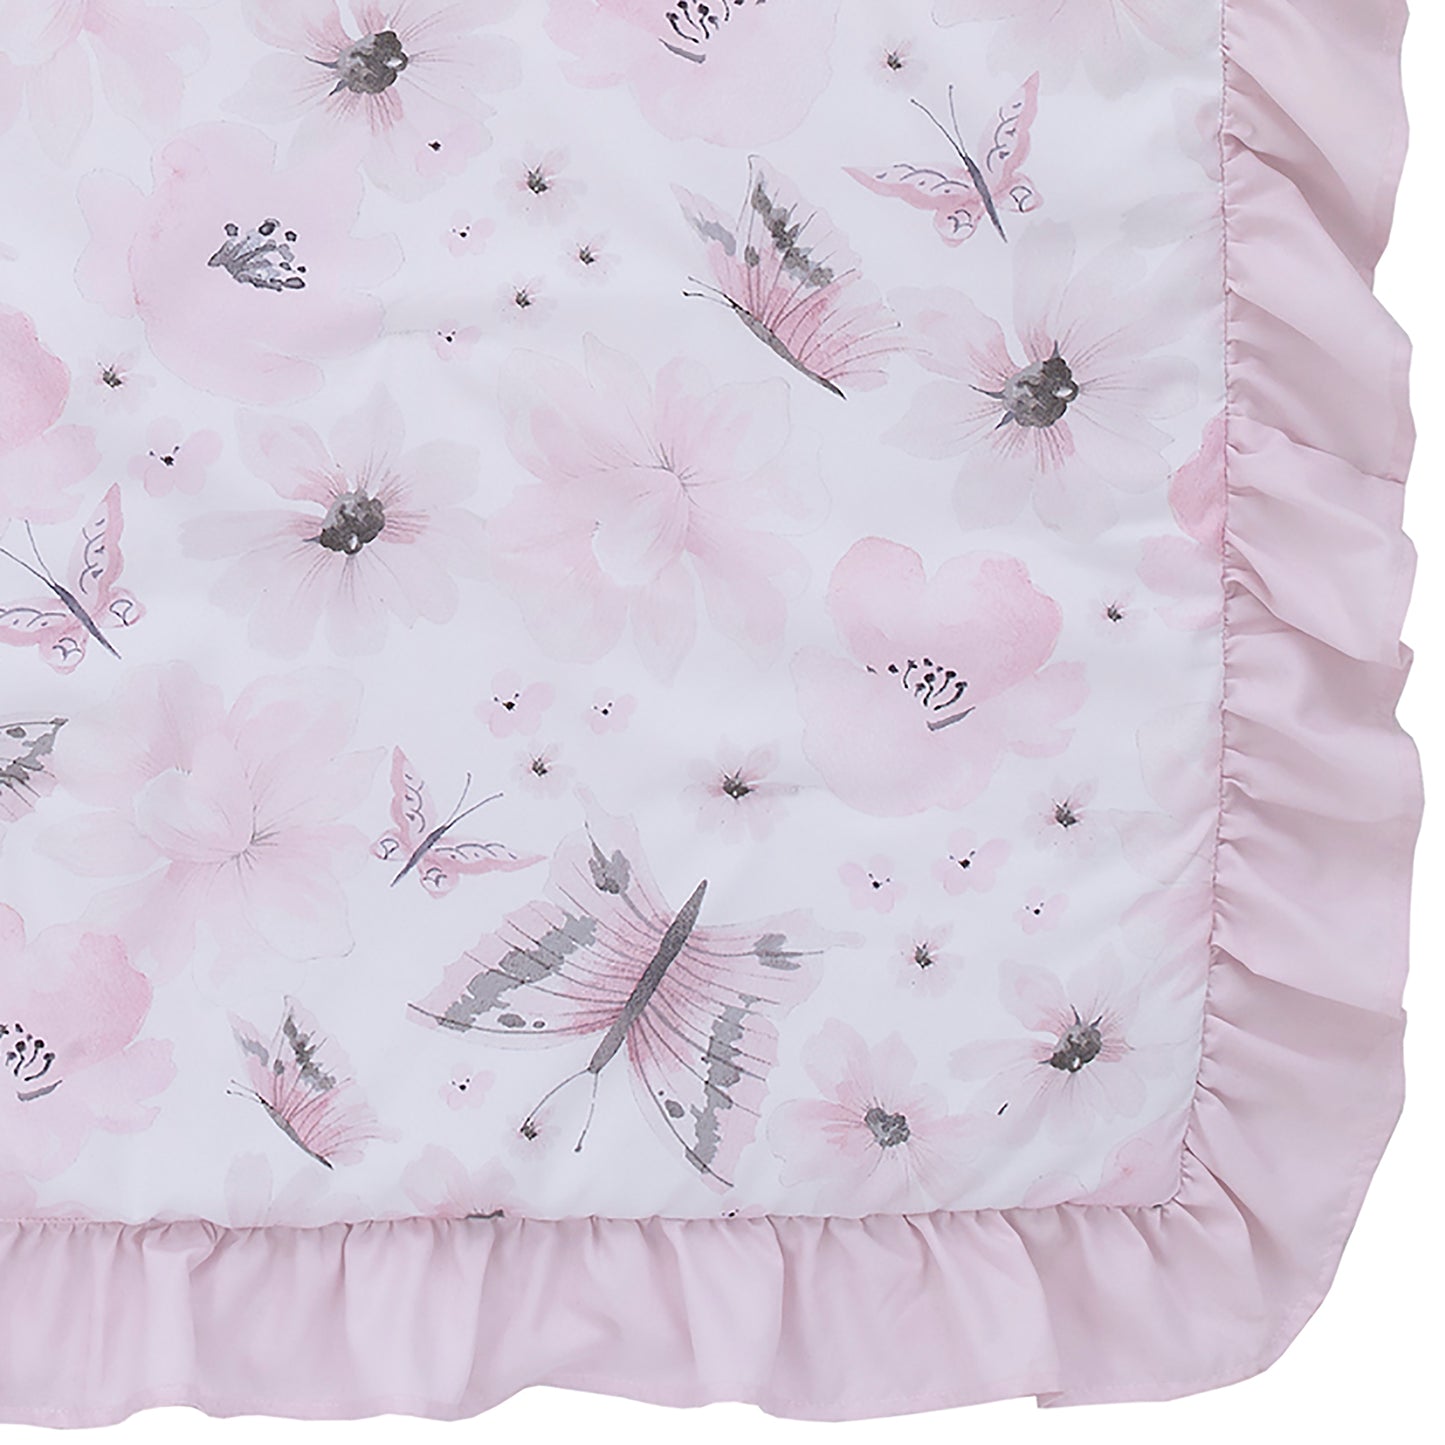 Everything Kids Floral Butterfly Pink, White, and Gray 4 Piece Toddler Bed Set - Comforter, Fitted Bottom Sheet, Flat Top Sheet, and Reversible Pillowcase